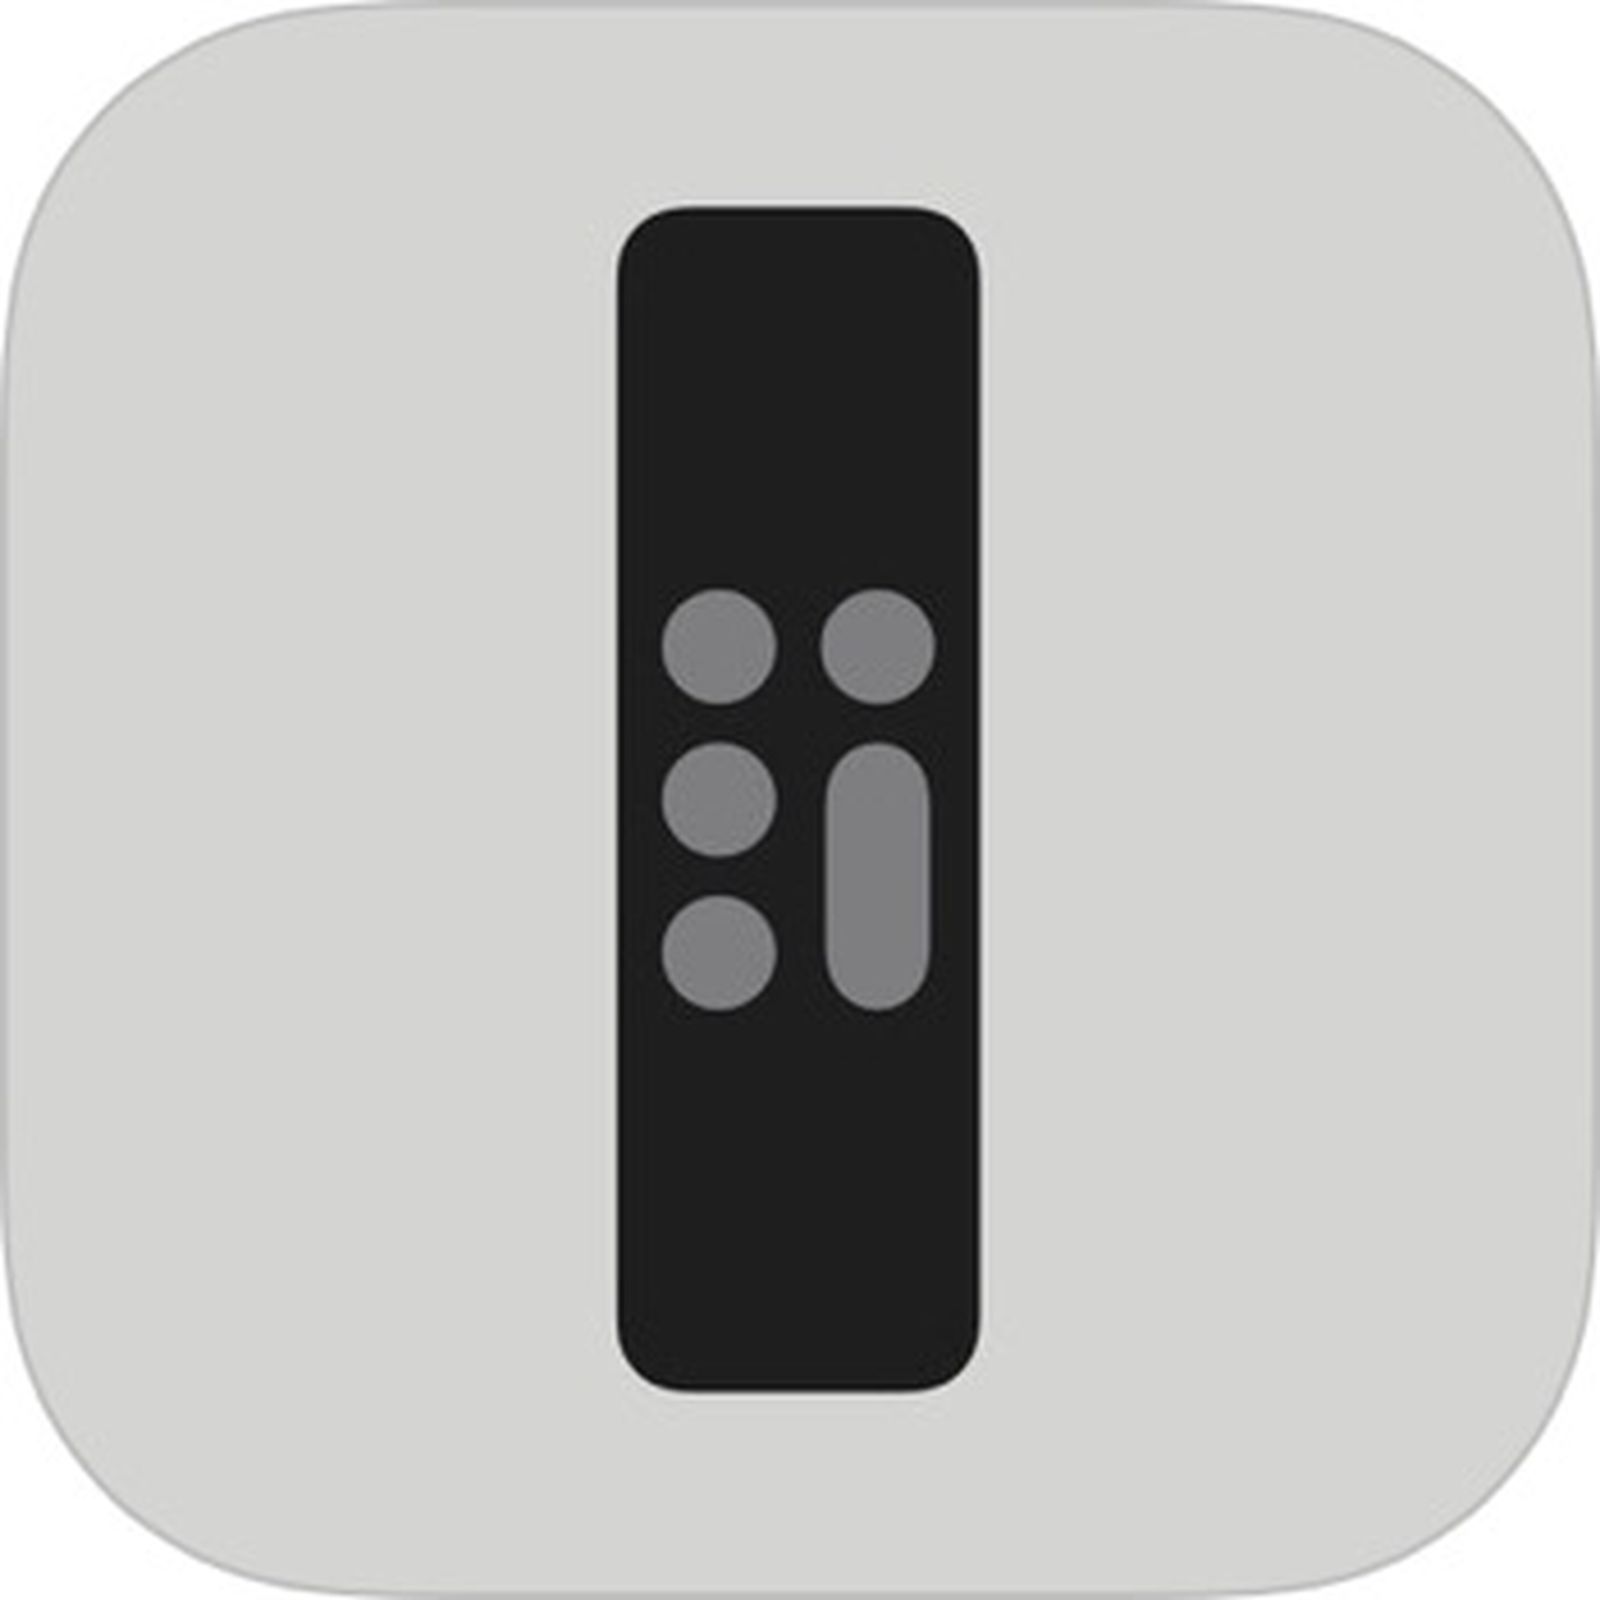 Apple TV Remote App for iOS Gets New Icon -